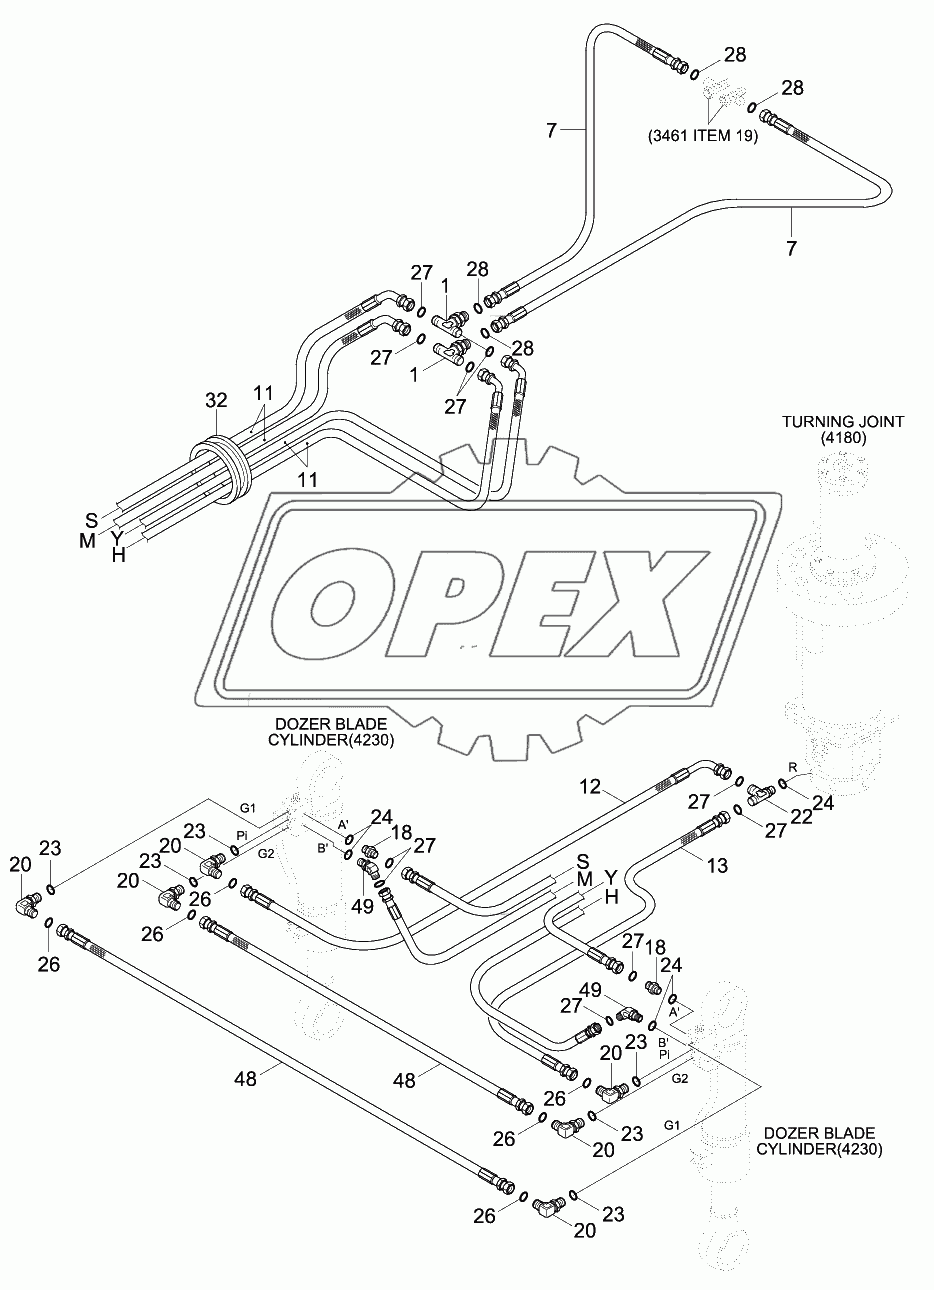 LOWER HYD PIPING 2 (F/BLD, R/OUT, #0067-)